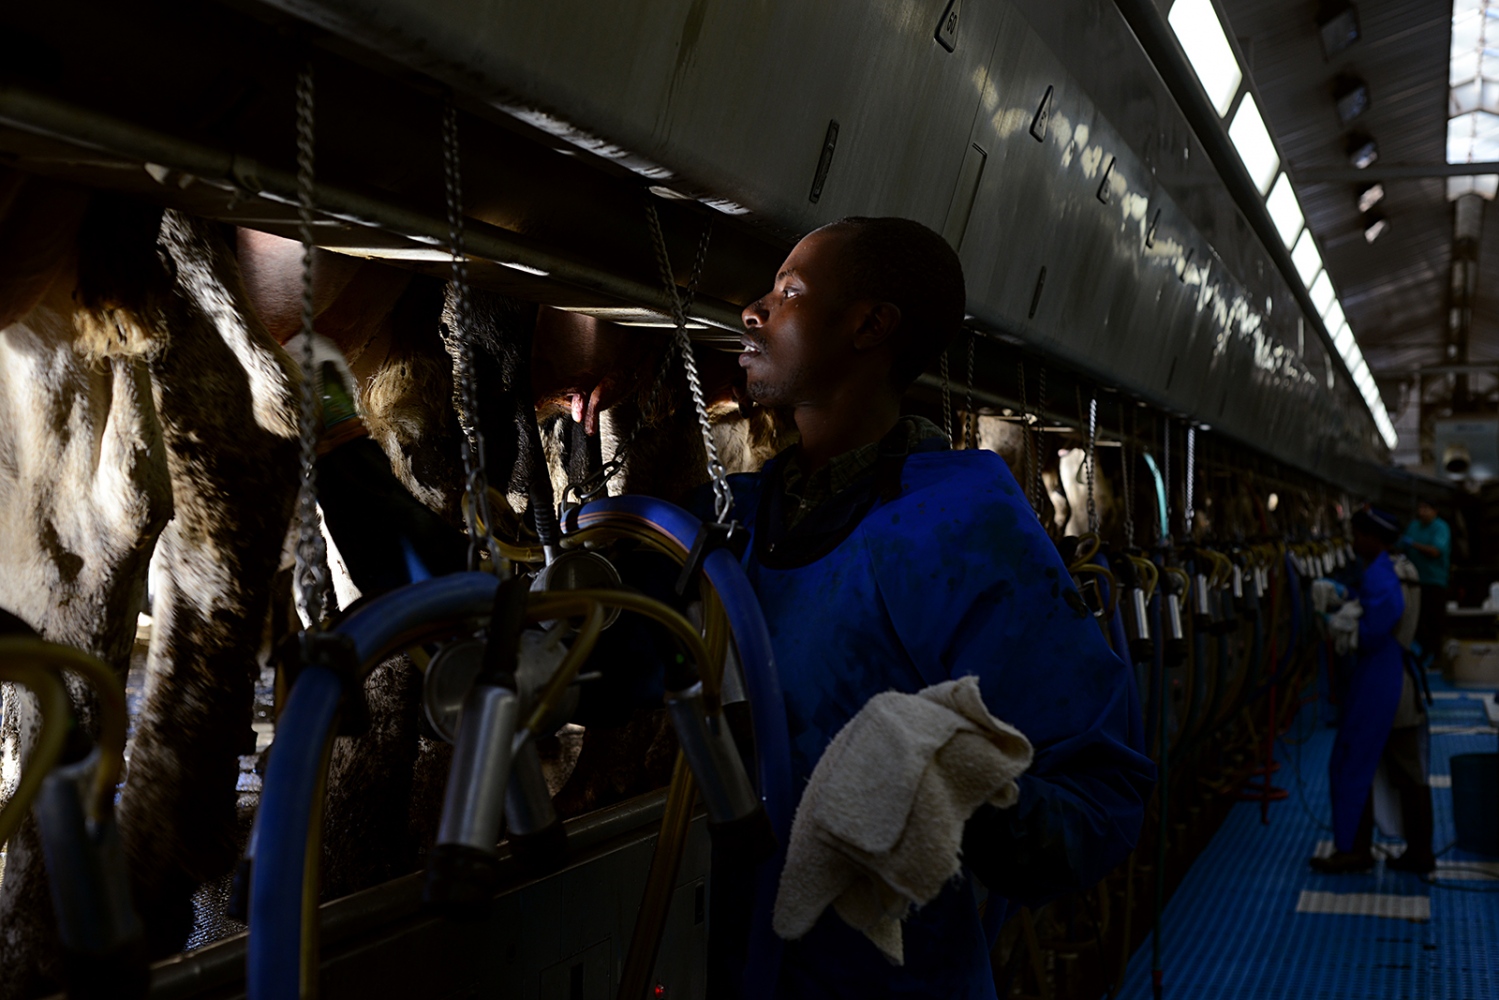 Celestin dries the teats of the cows between milking during his night shift.